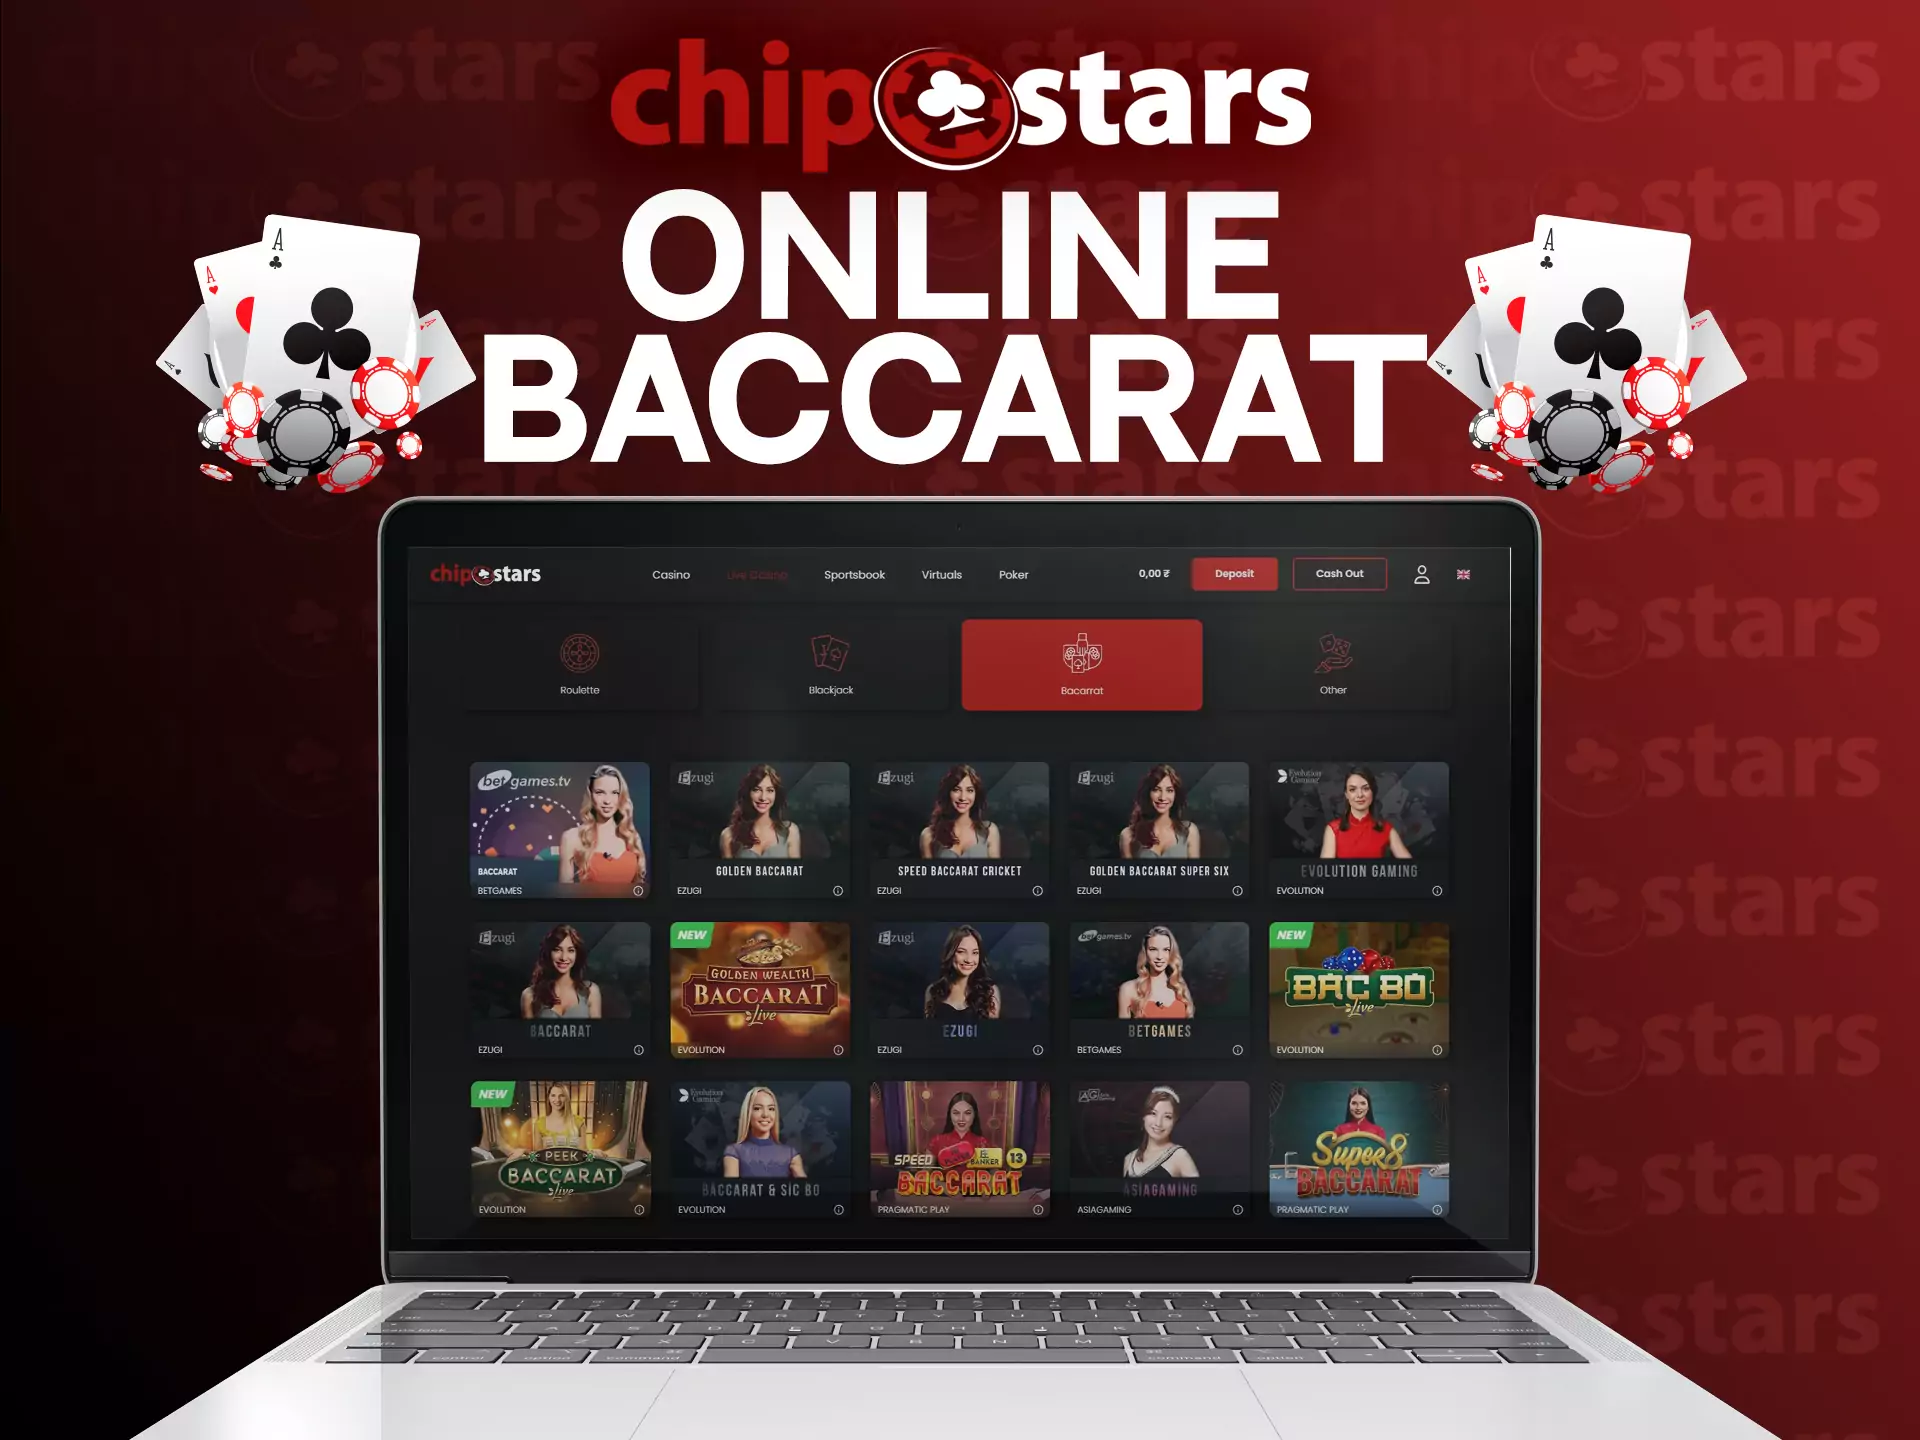 You can play the game of baccarat in the Chipstars Casino.